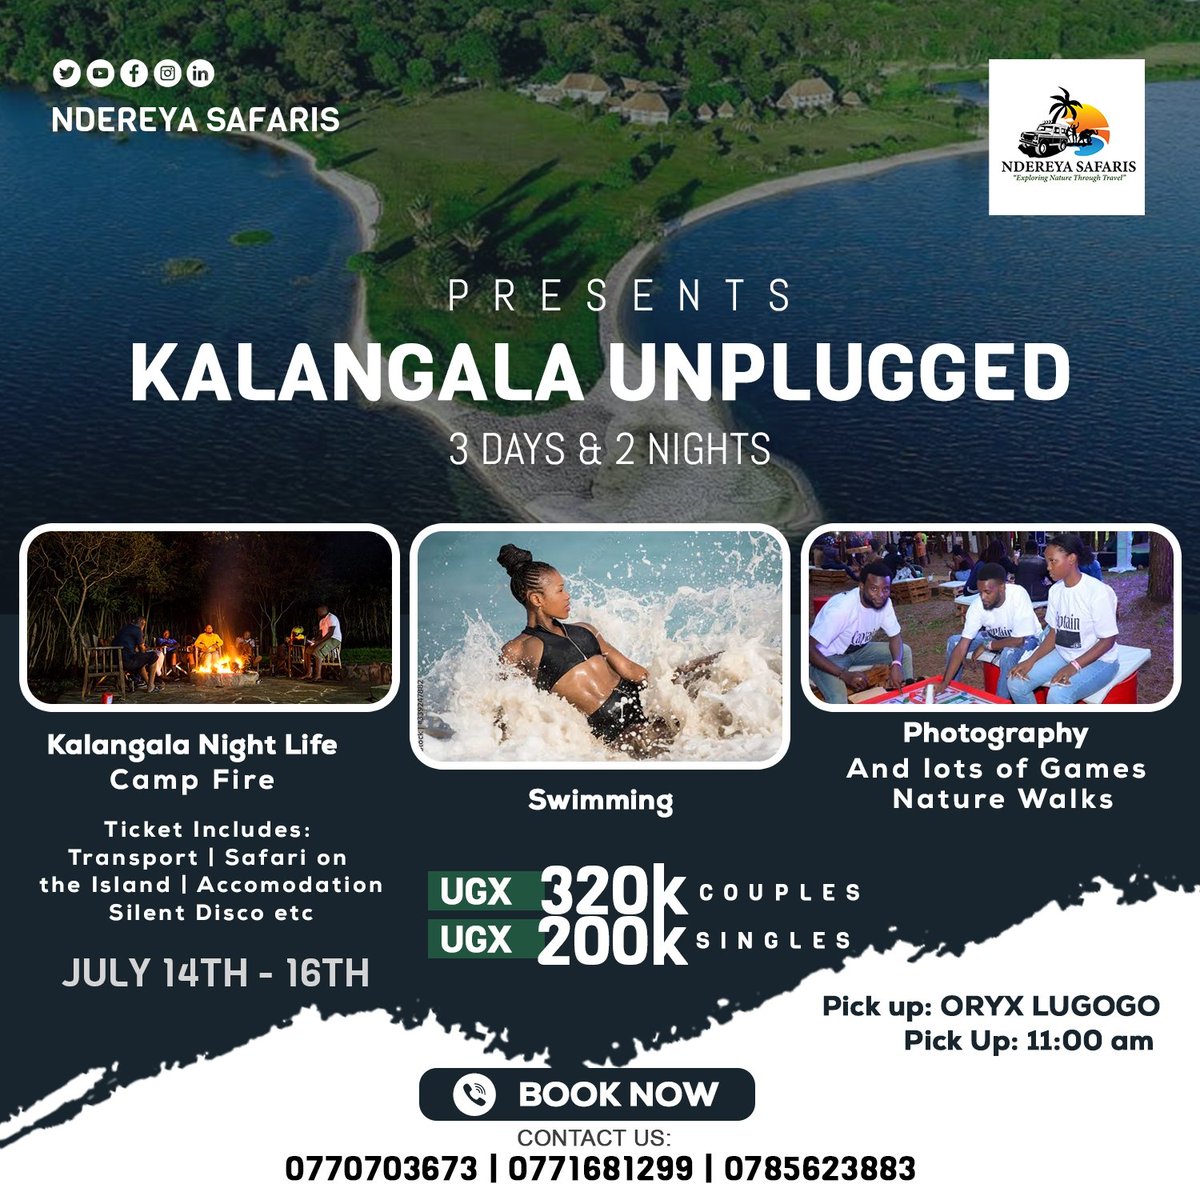 And Here it Comes, Kalangala Unplugged,  Courtesy of NDEREYA SAFARIS.
Exploring Nature through Travel, This is going to be an Epic one.
Let's come thru and be there. For Bookings, Inbox or Call the Numbers on the Poster.
#Promotingdomestictourism